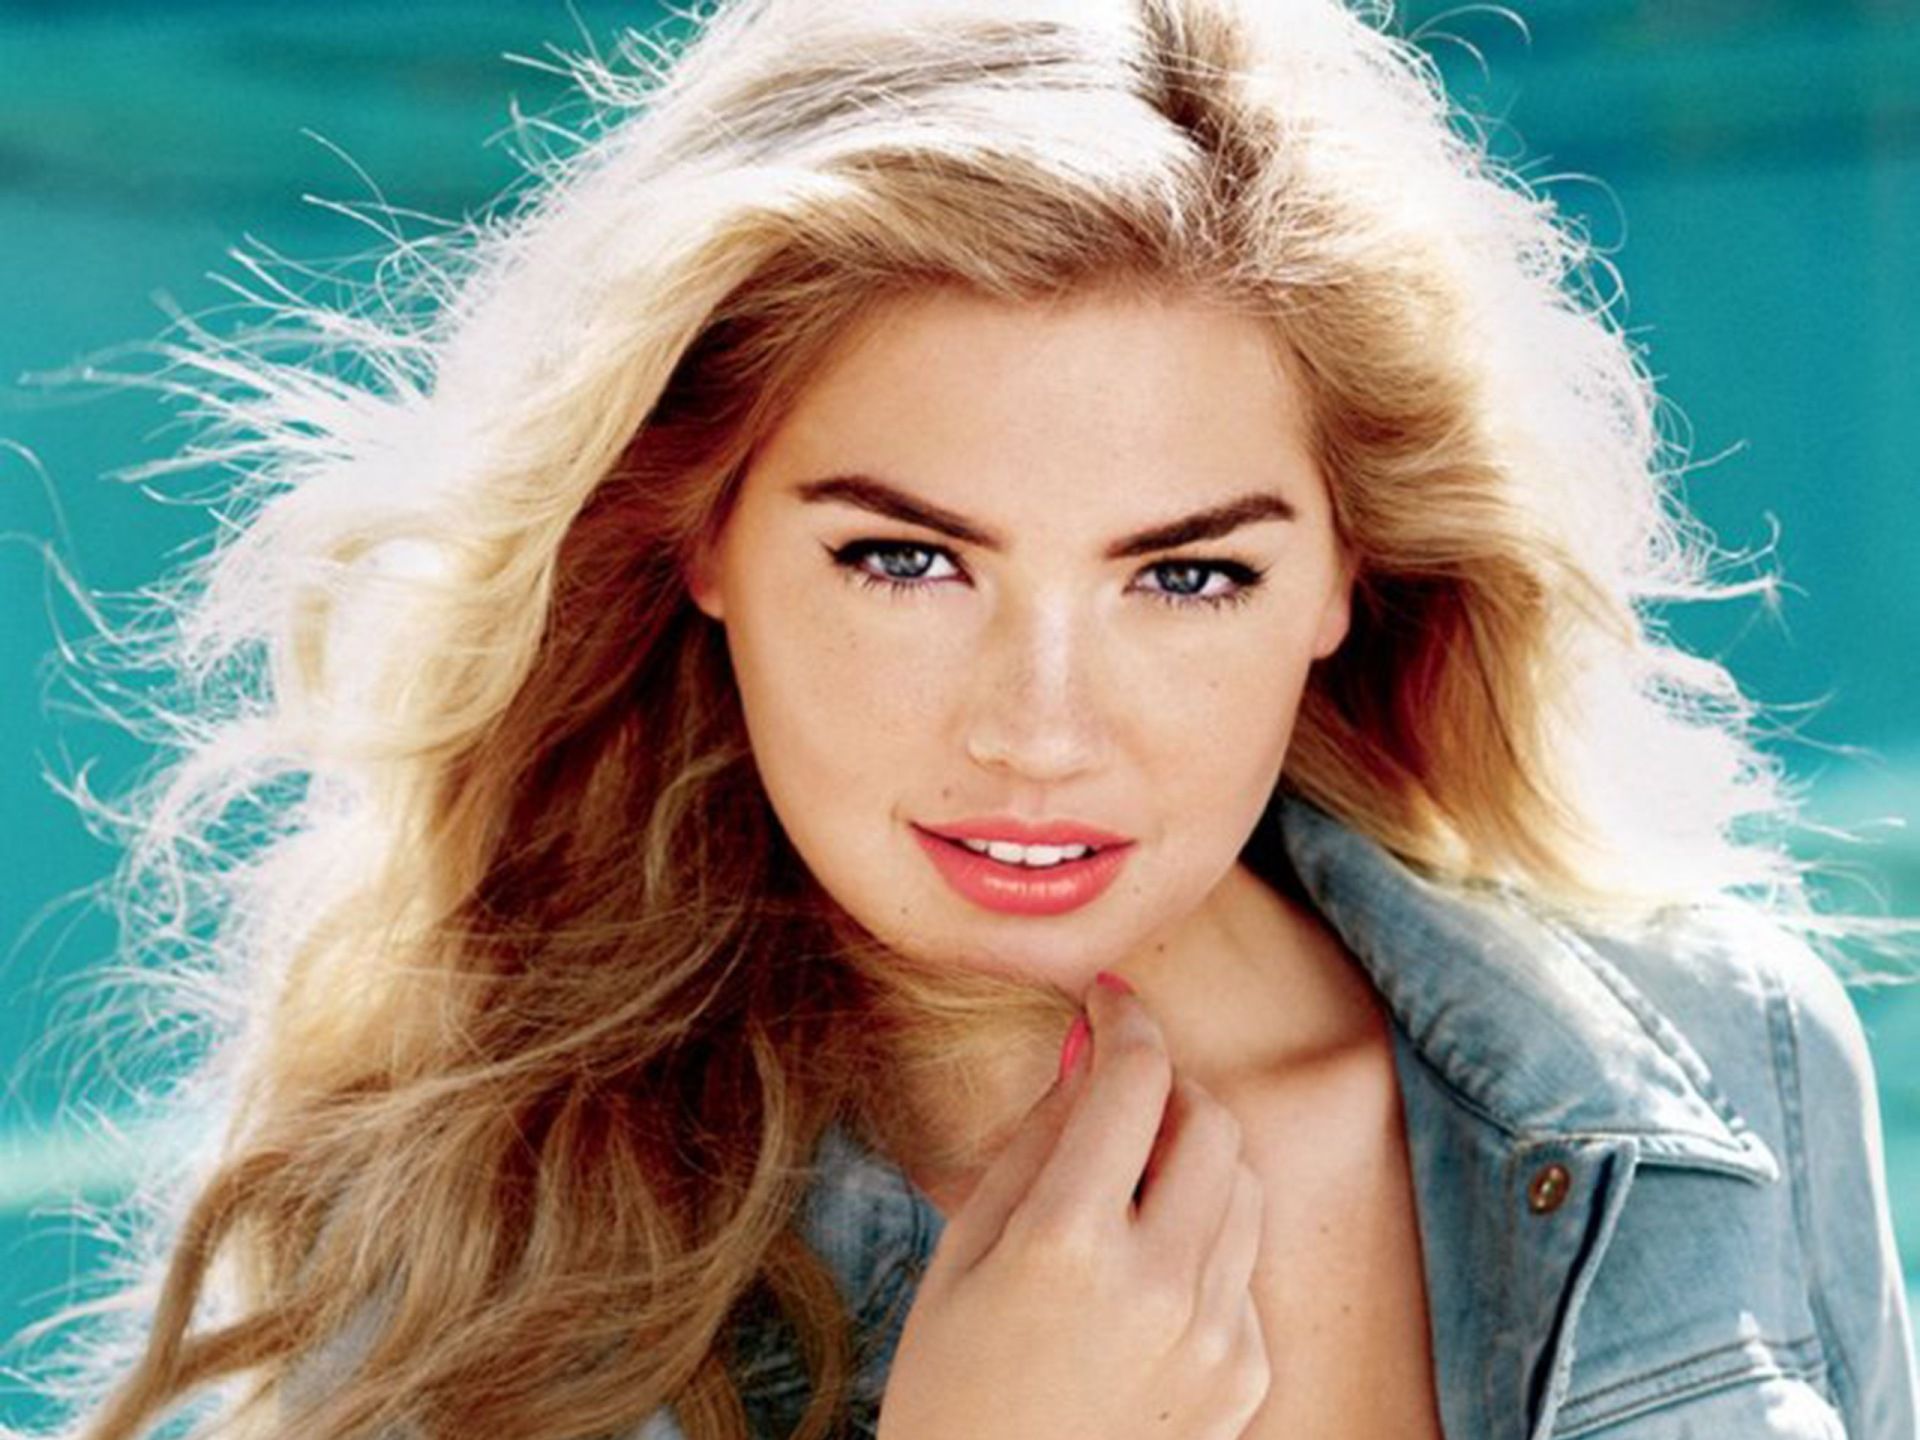 Free Download Kate Upton Wallpaper High Quality And